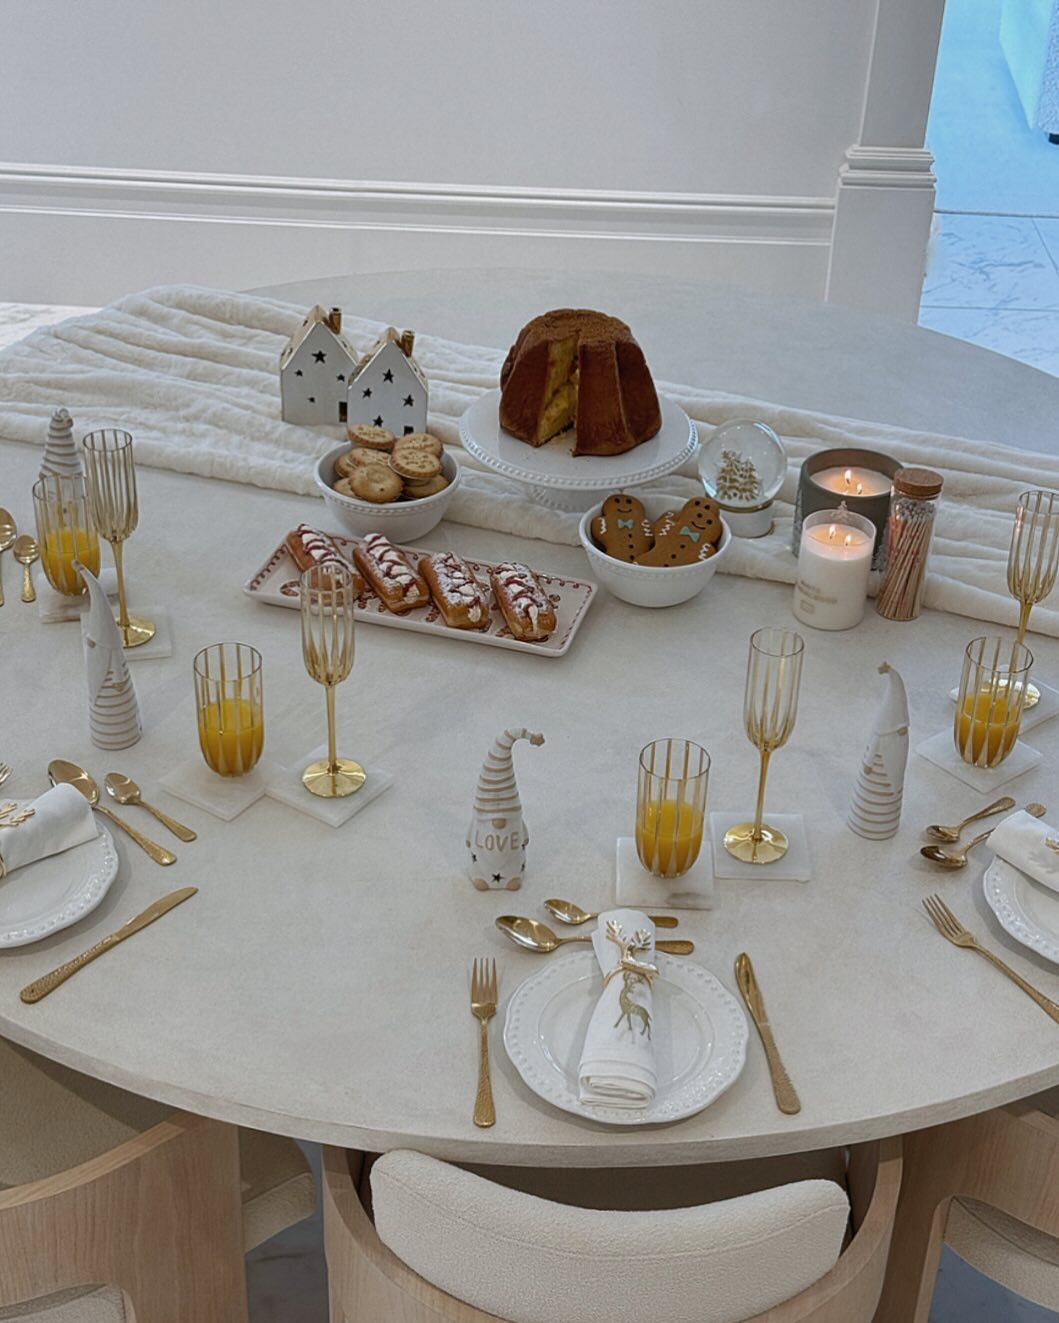 Molly created this entire table setting with Homesense buys